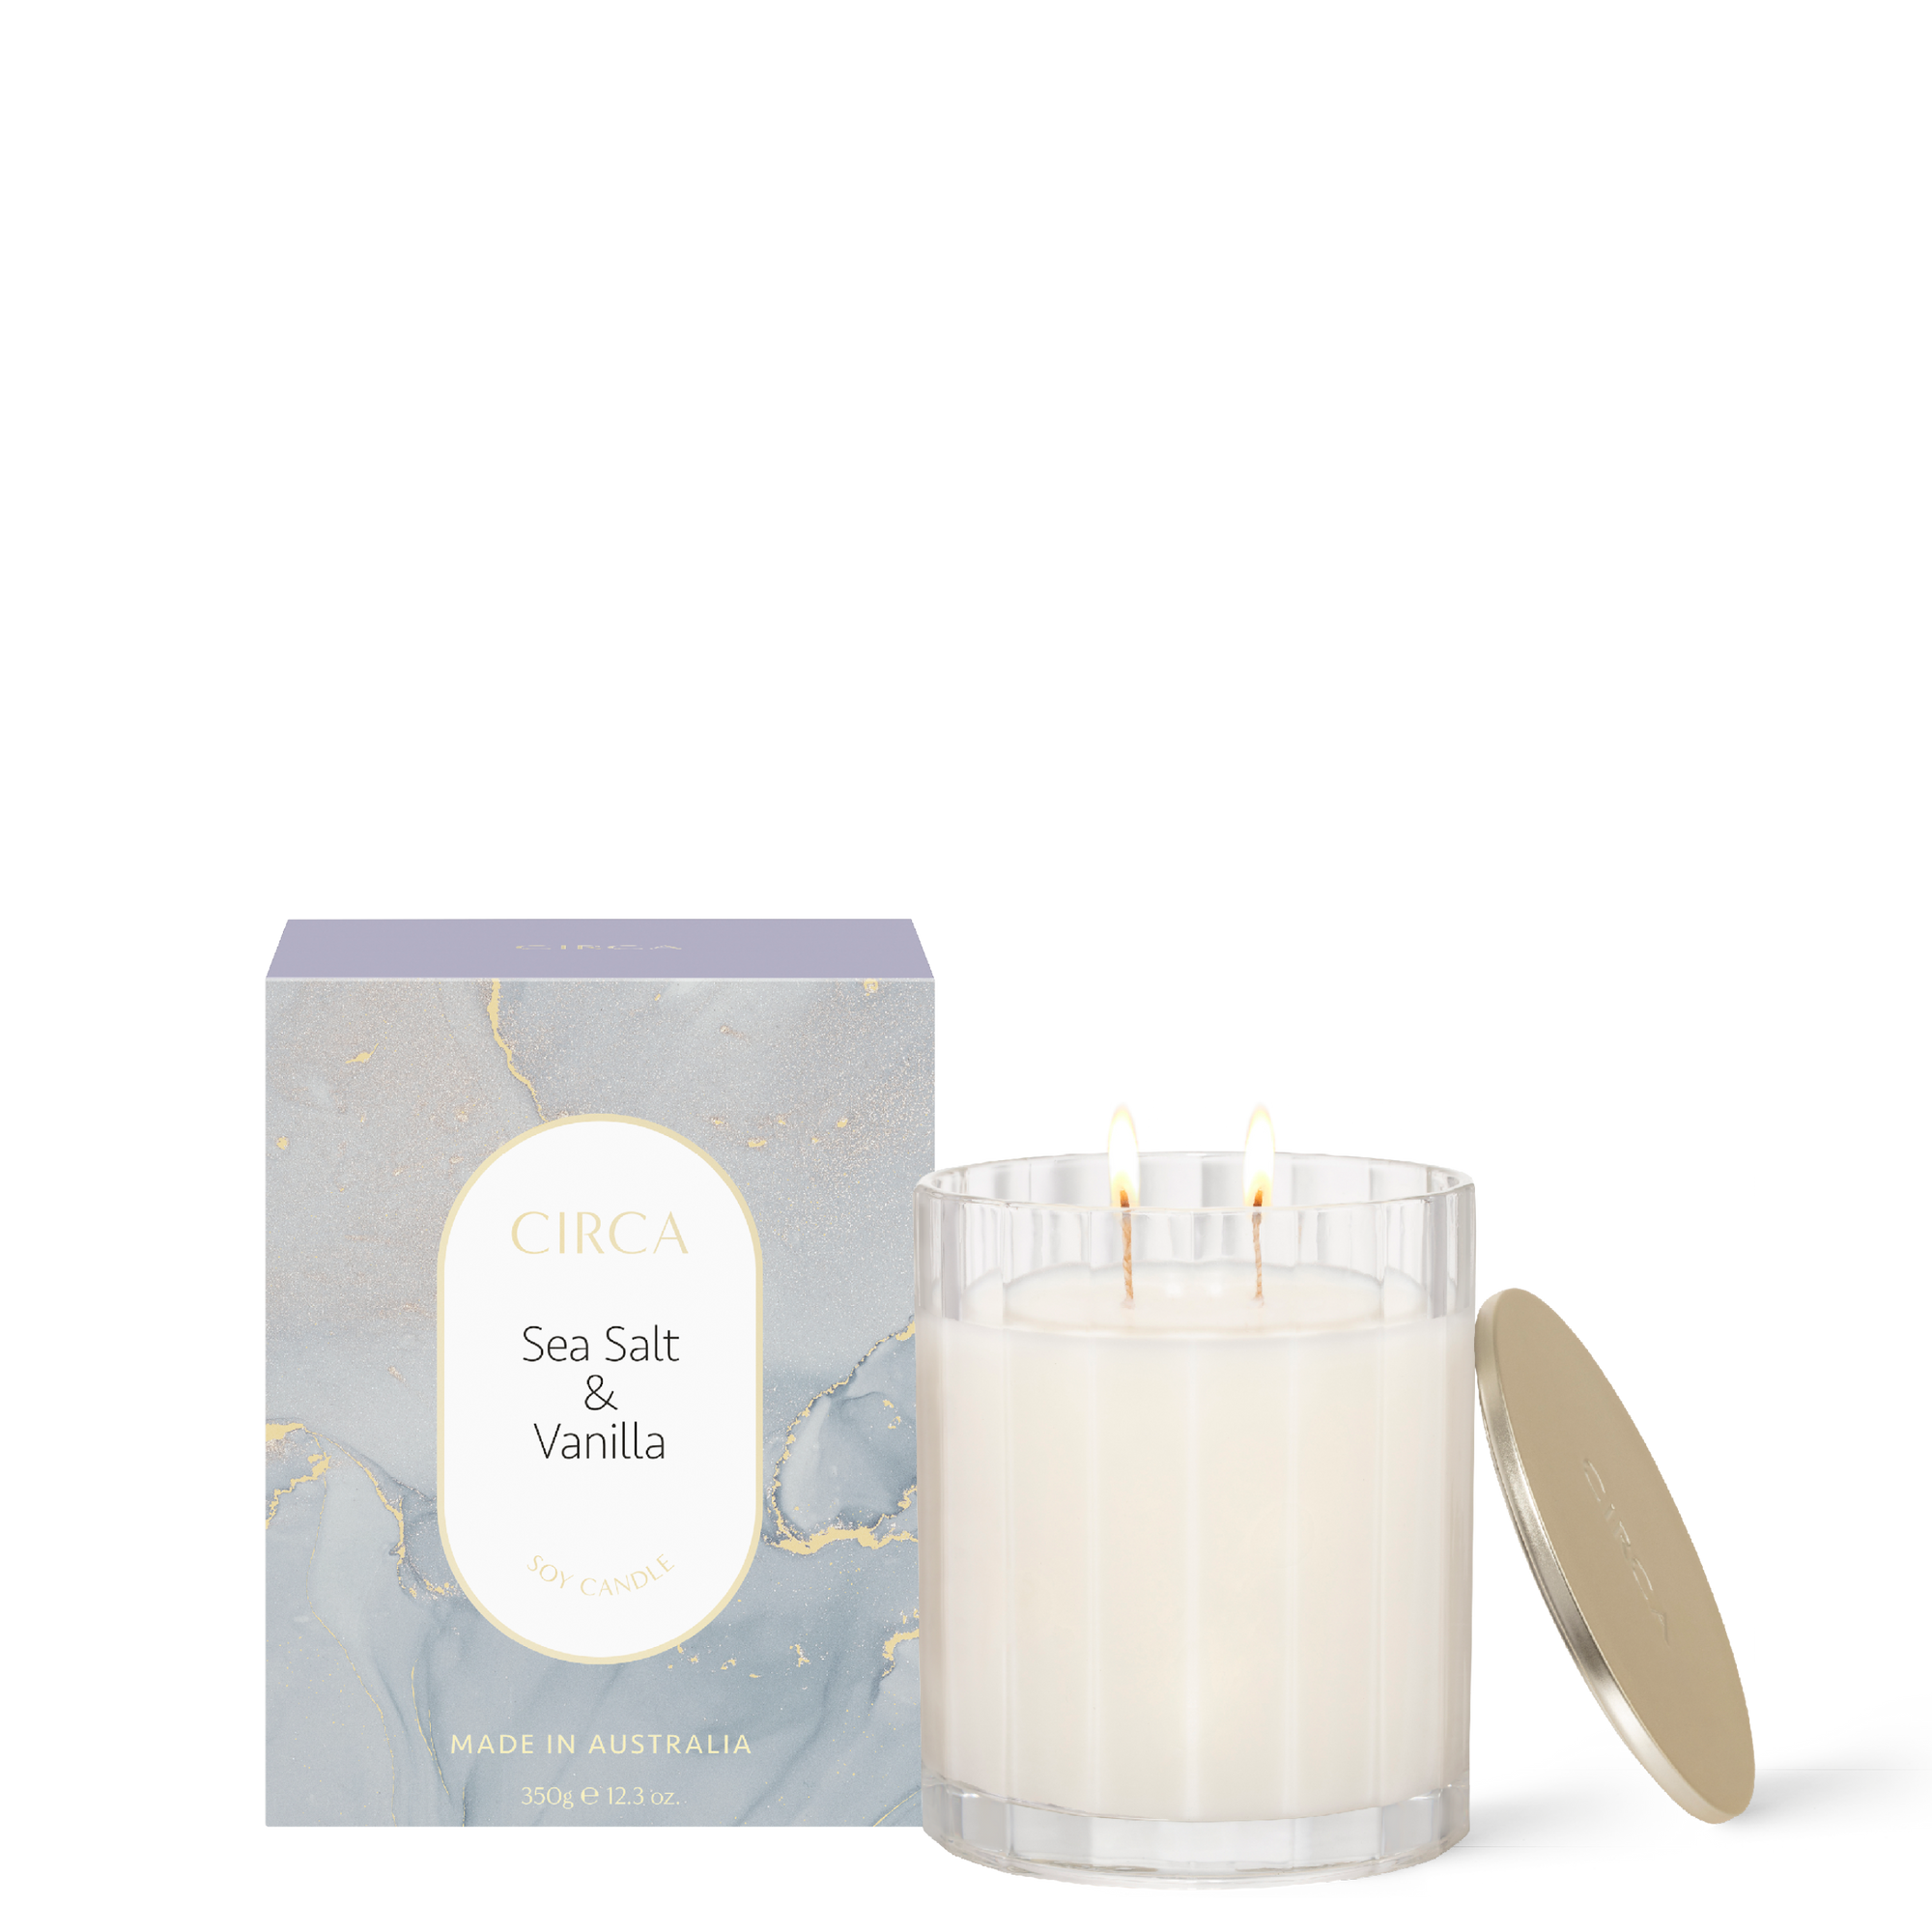 Sea Salt and Vanilla Soy Candle 350g